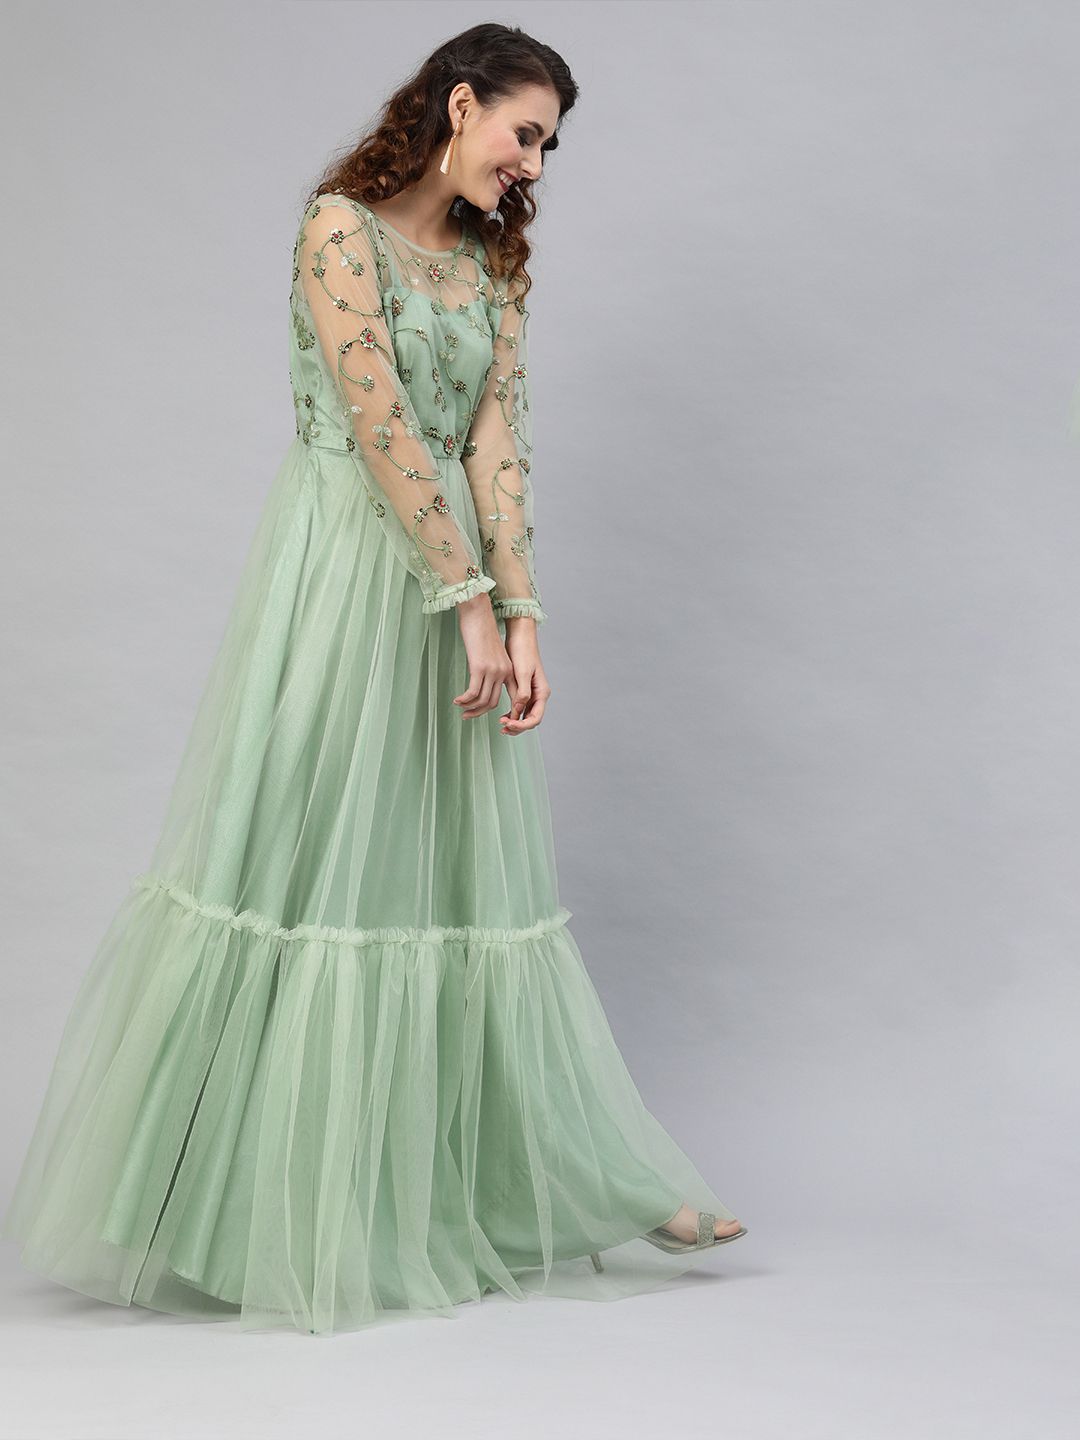 Inddus Women Mint Green Embellished Net Semi-Sheer Maxi Dress Price in India